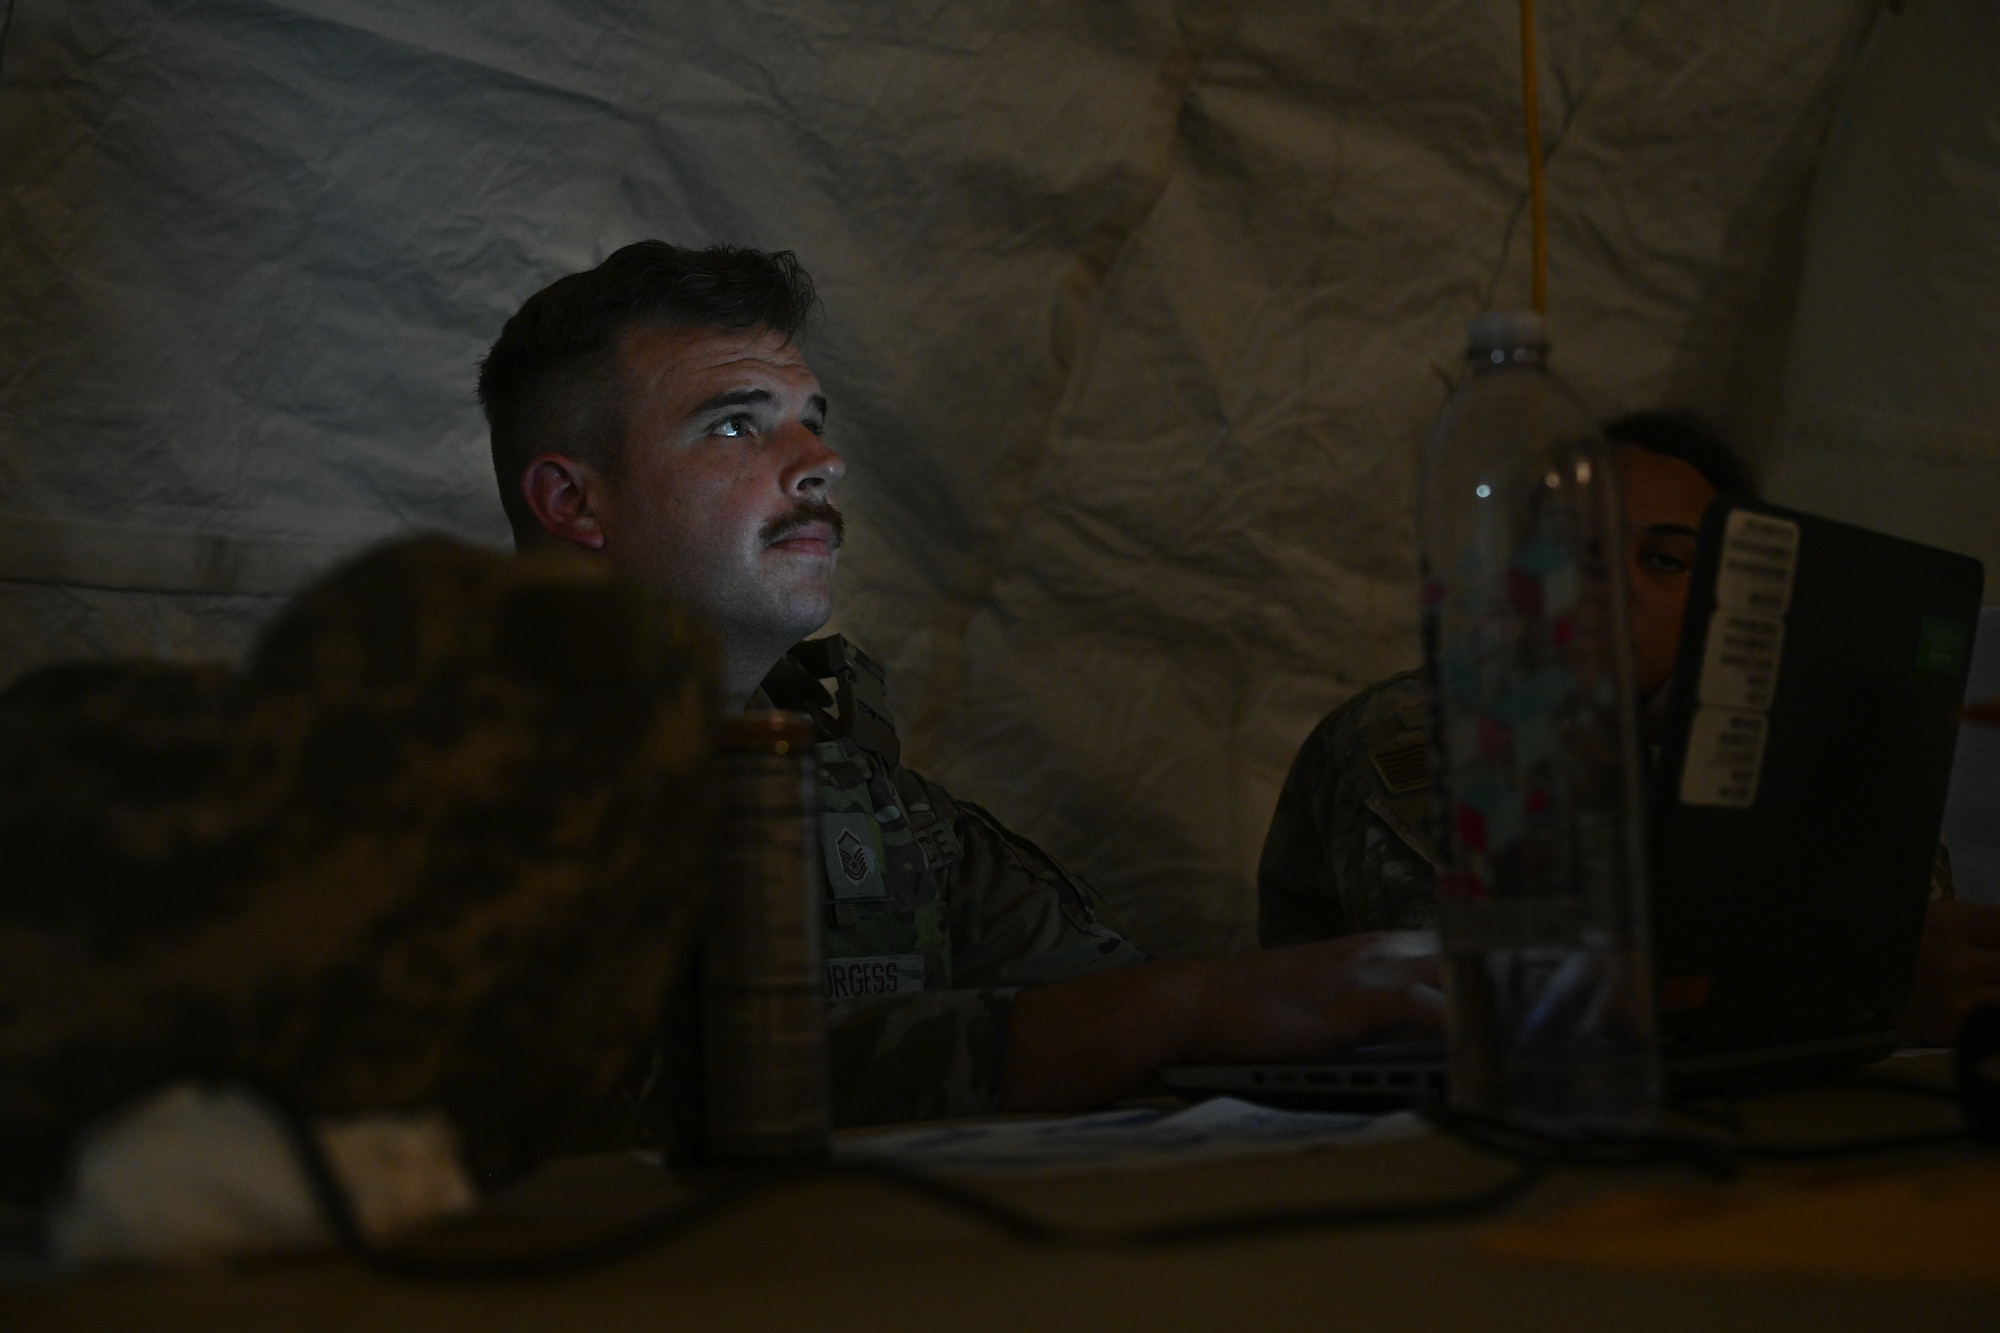 Master Sgt. Jared Burgess,4th Force Support Squadron personnel support for contingency operations team chief, in-processes Airmen during Razor Talon 23-1 at Marine Corps Air Station Cherry Point, North Carolina, July 24, 2023. RT-23 is an agile combat employment focused exercise, designed to test the 4th Fighter Wing’s ability to operate as a lead wing to generate combat airpower while continuing to move, maneuver, sustain the wing and subordinate force elements in a dynamic contested environment. (U.S. Air Force photo by Staff Sgt. Koby I. Saunders)